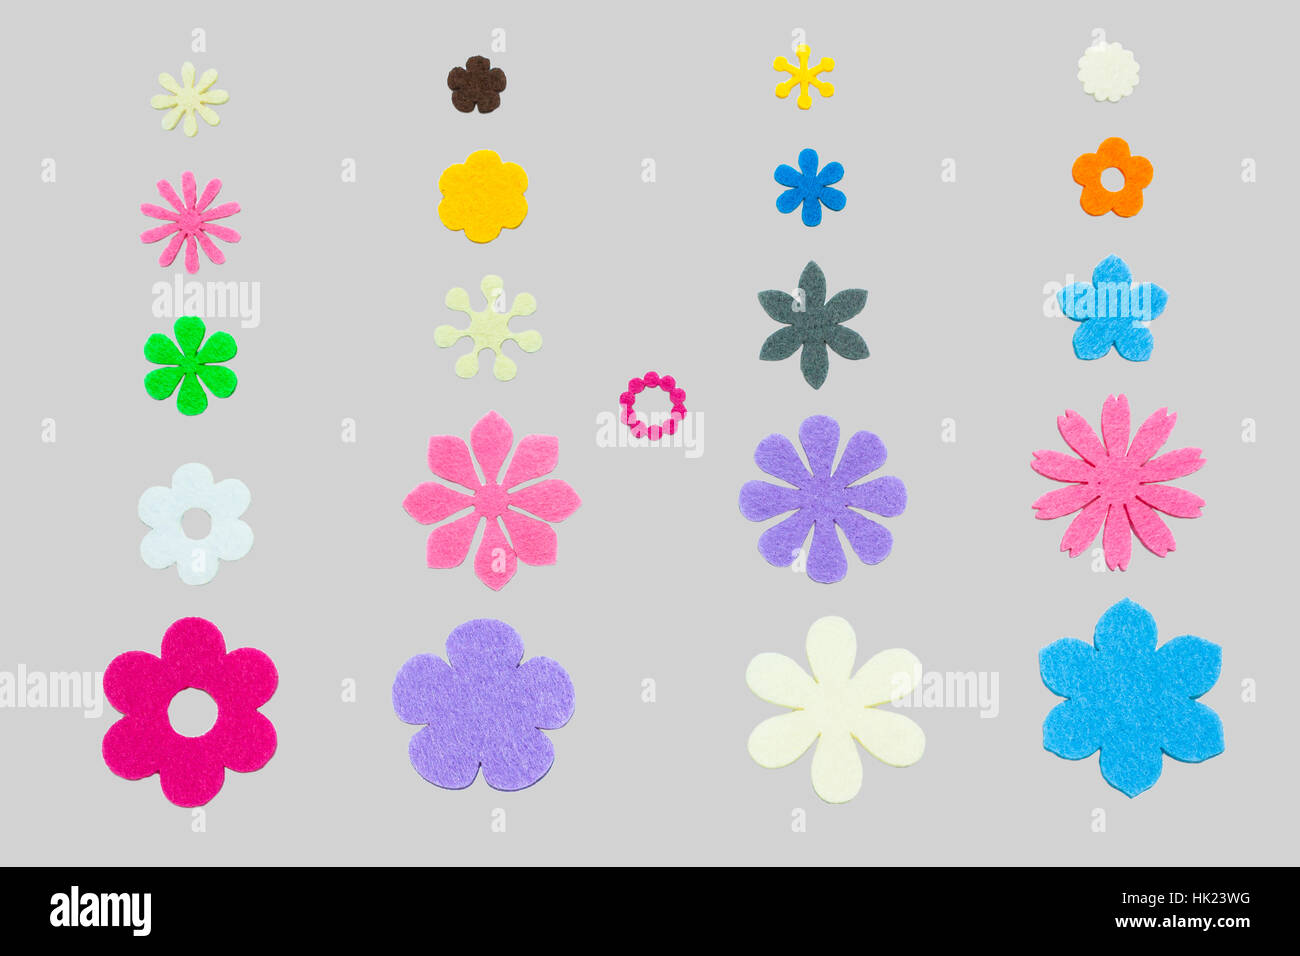 Isolation Colorful Variety Shaped Of Flower Papercuts On Grey Background Stock Photo